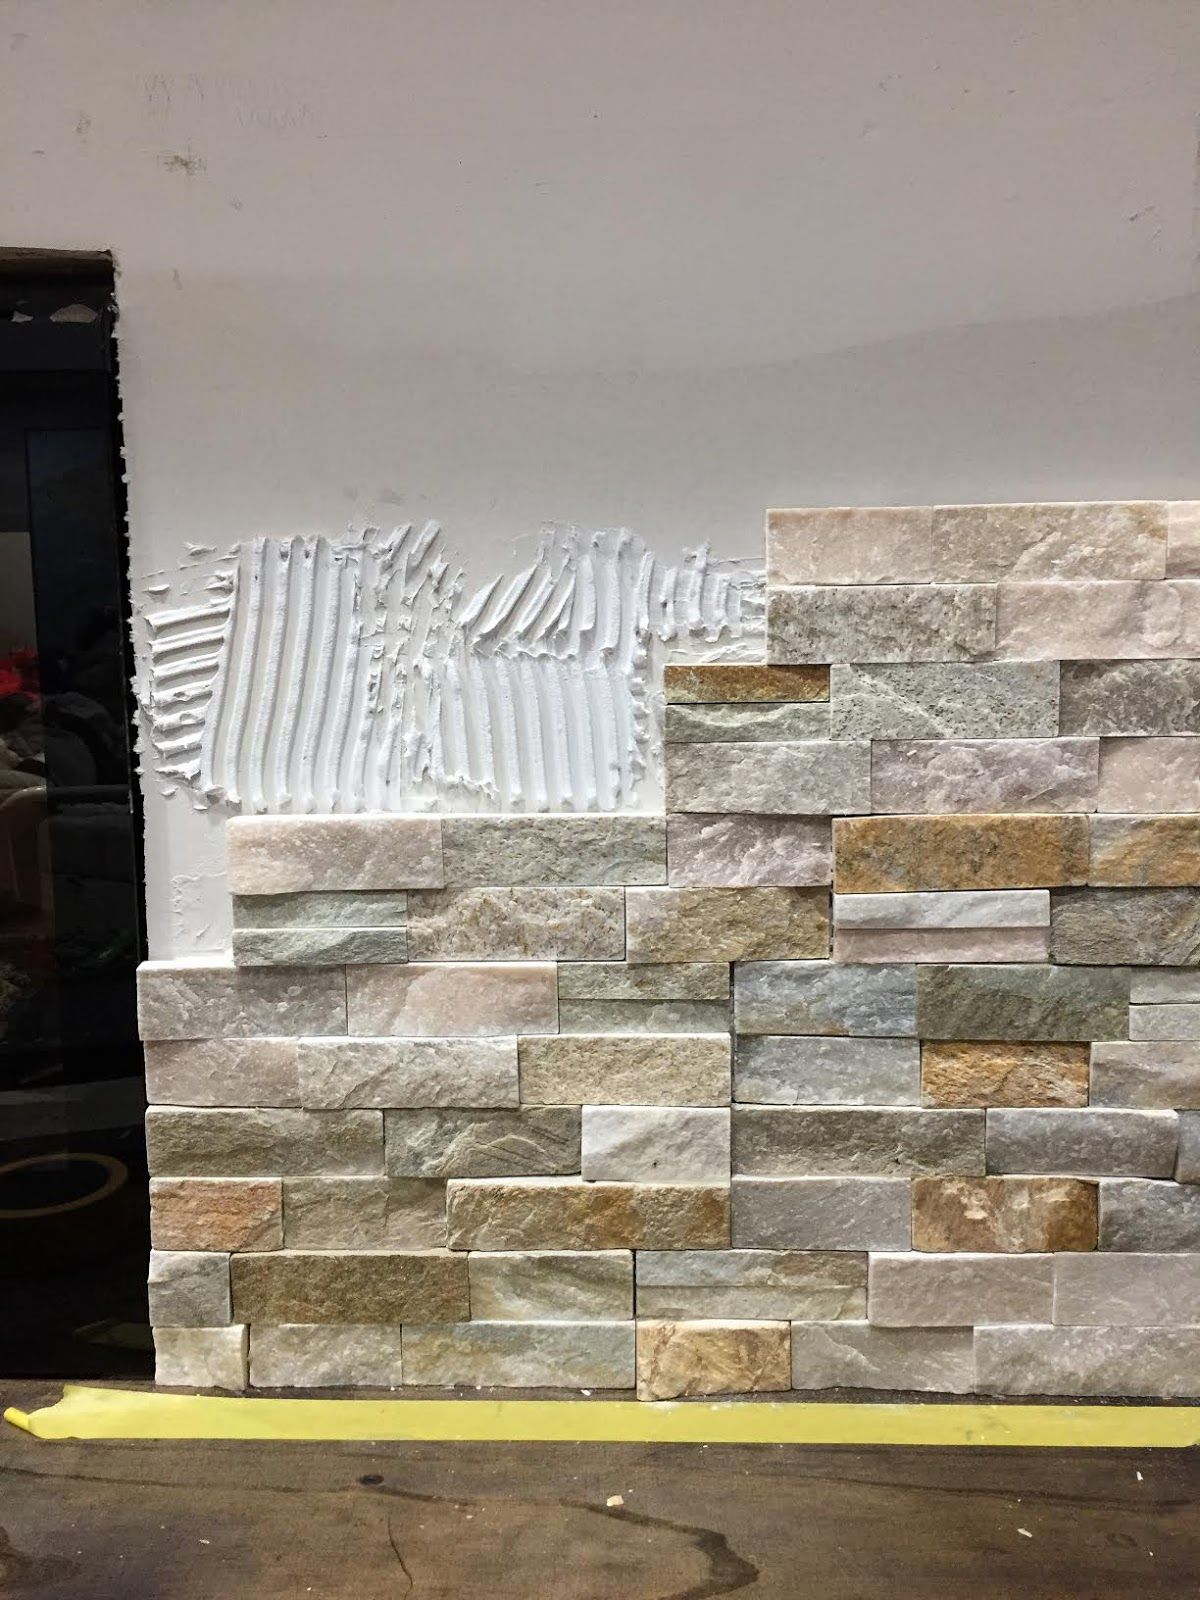 Flat Wall Fireplace Awesome How to Install Stacked Stone Tile On A Fireplace Wall